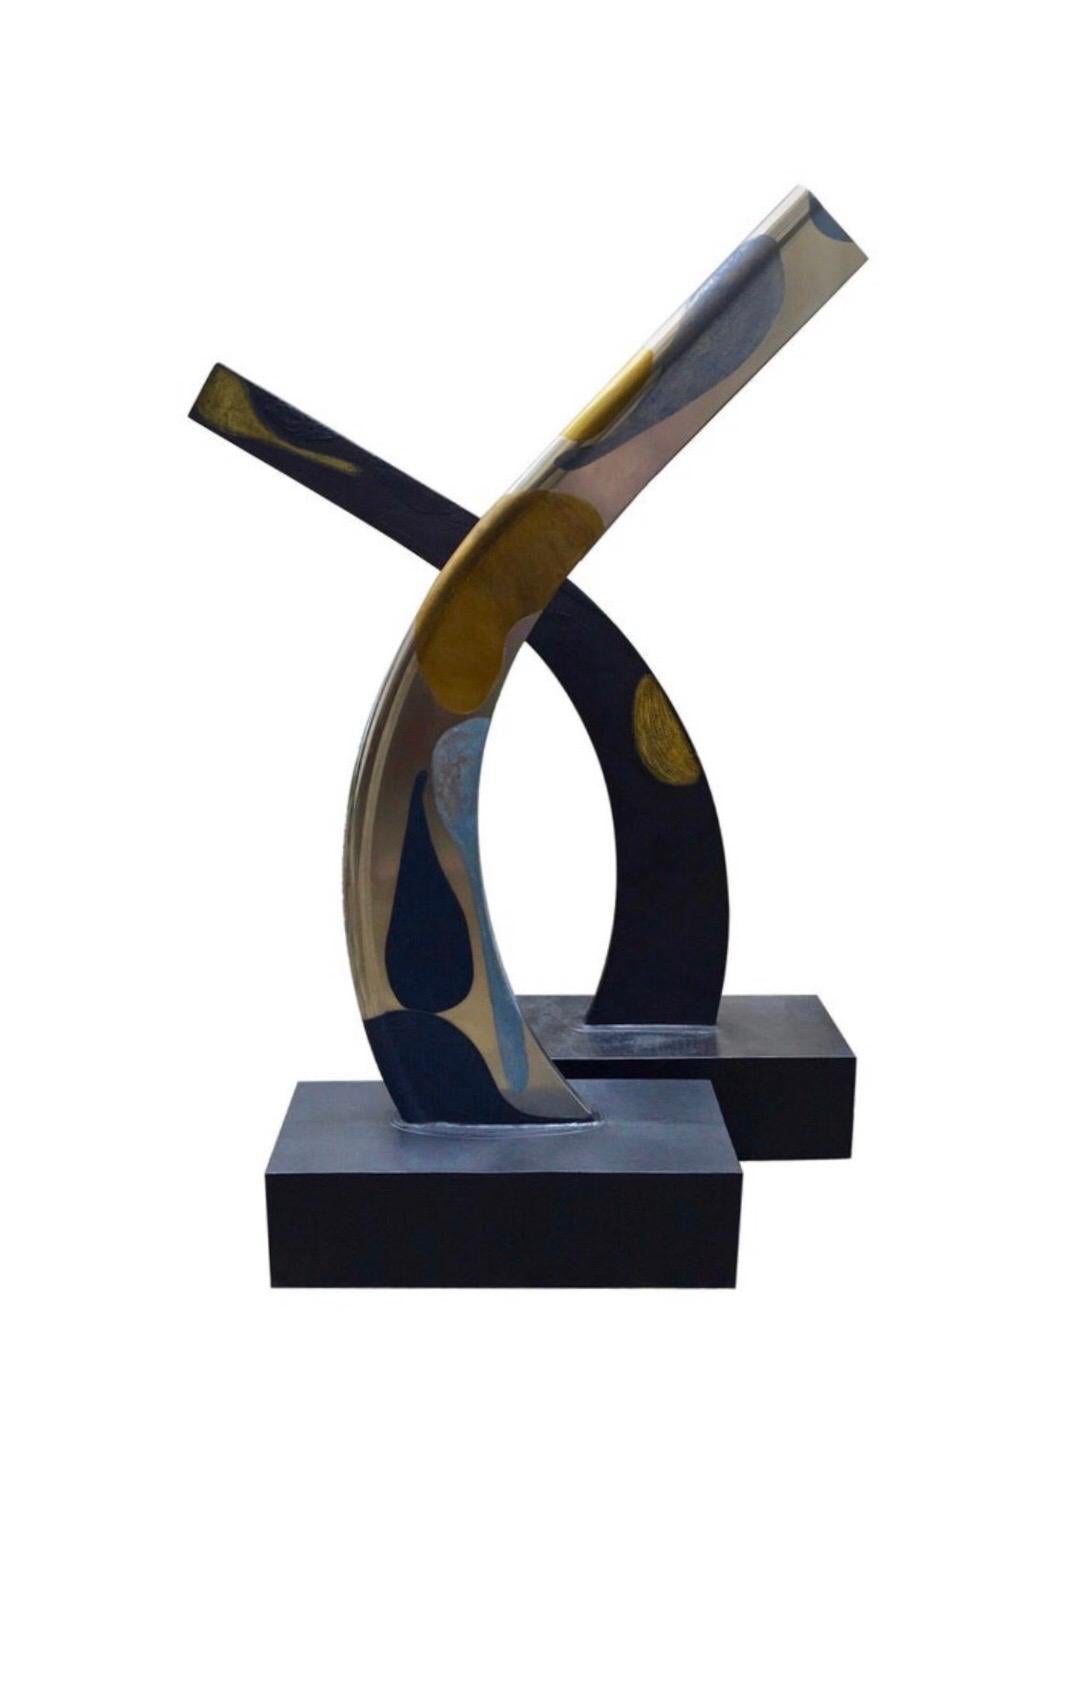 Contemporary Wood and Zinc Sculpture Indoor by Marielle Guégan French Artist